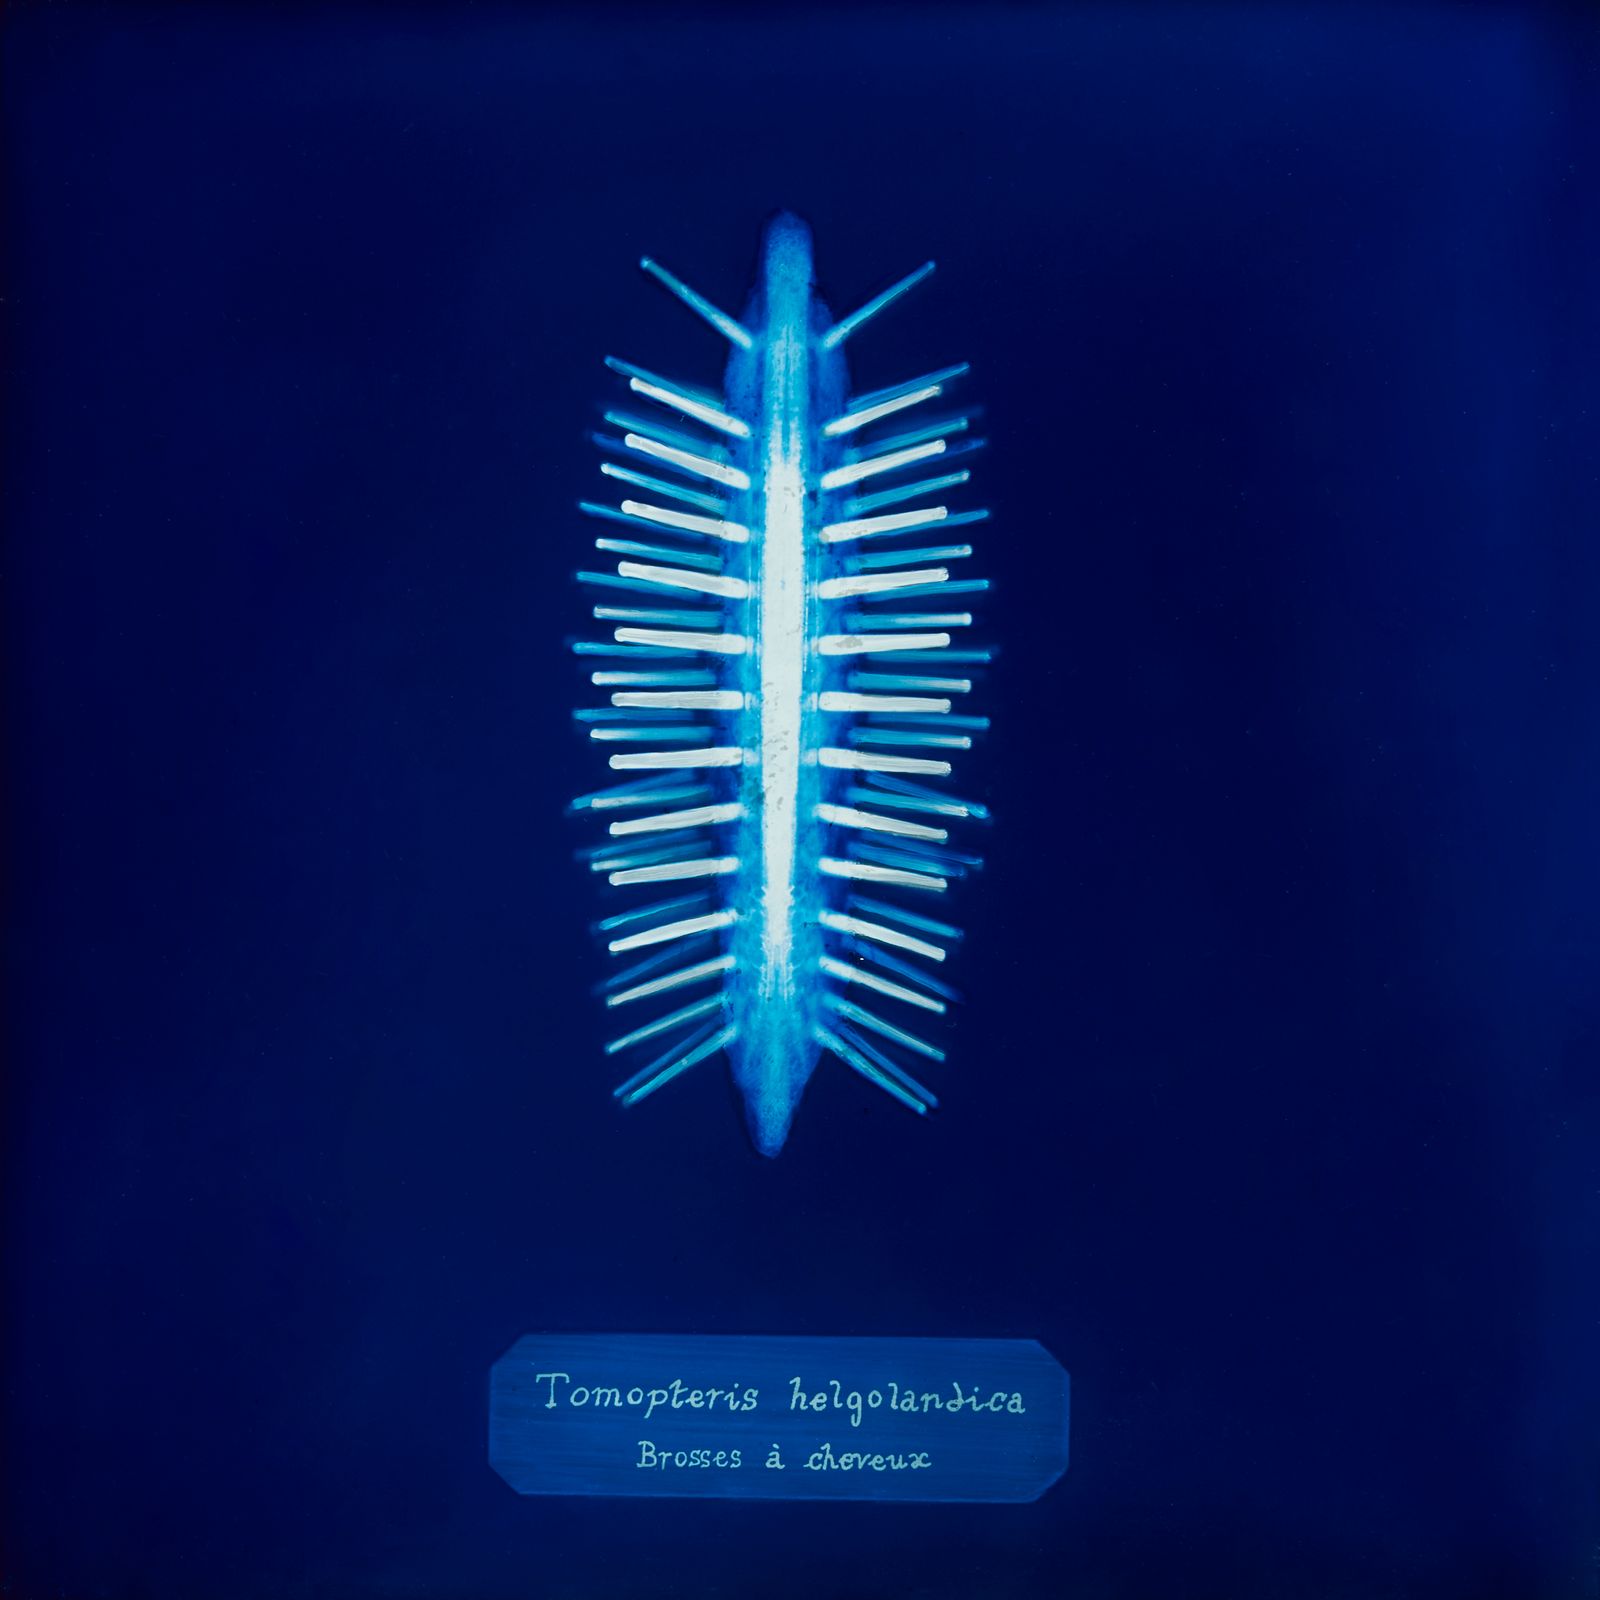 © Manon Lanjouère - Tomopteris helgolandica, Hairbrush, Cyanotype on glass and fluorescent vynil emulsion, 20x20 cm